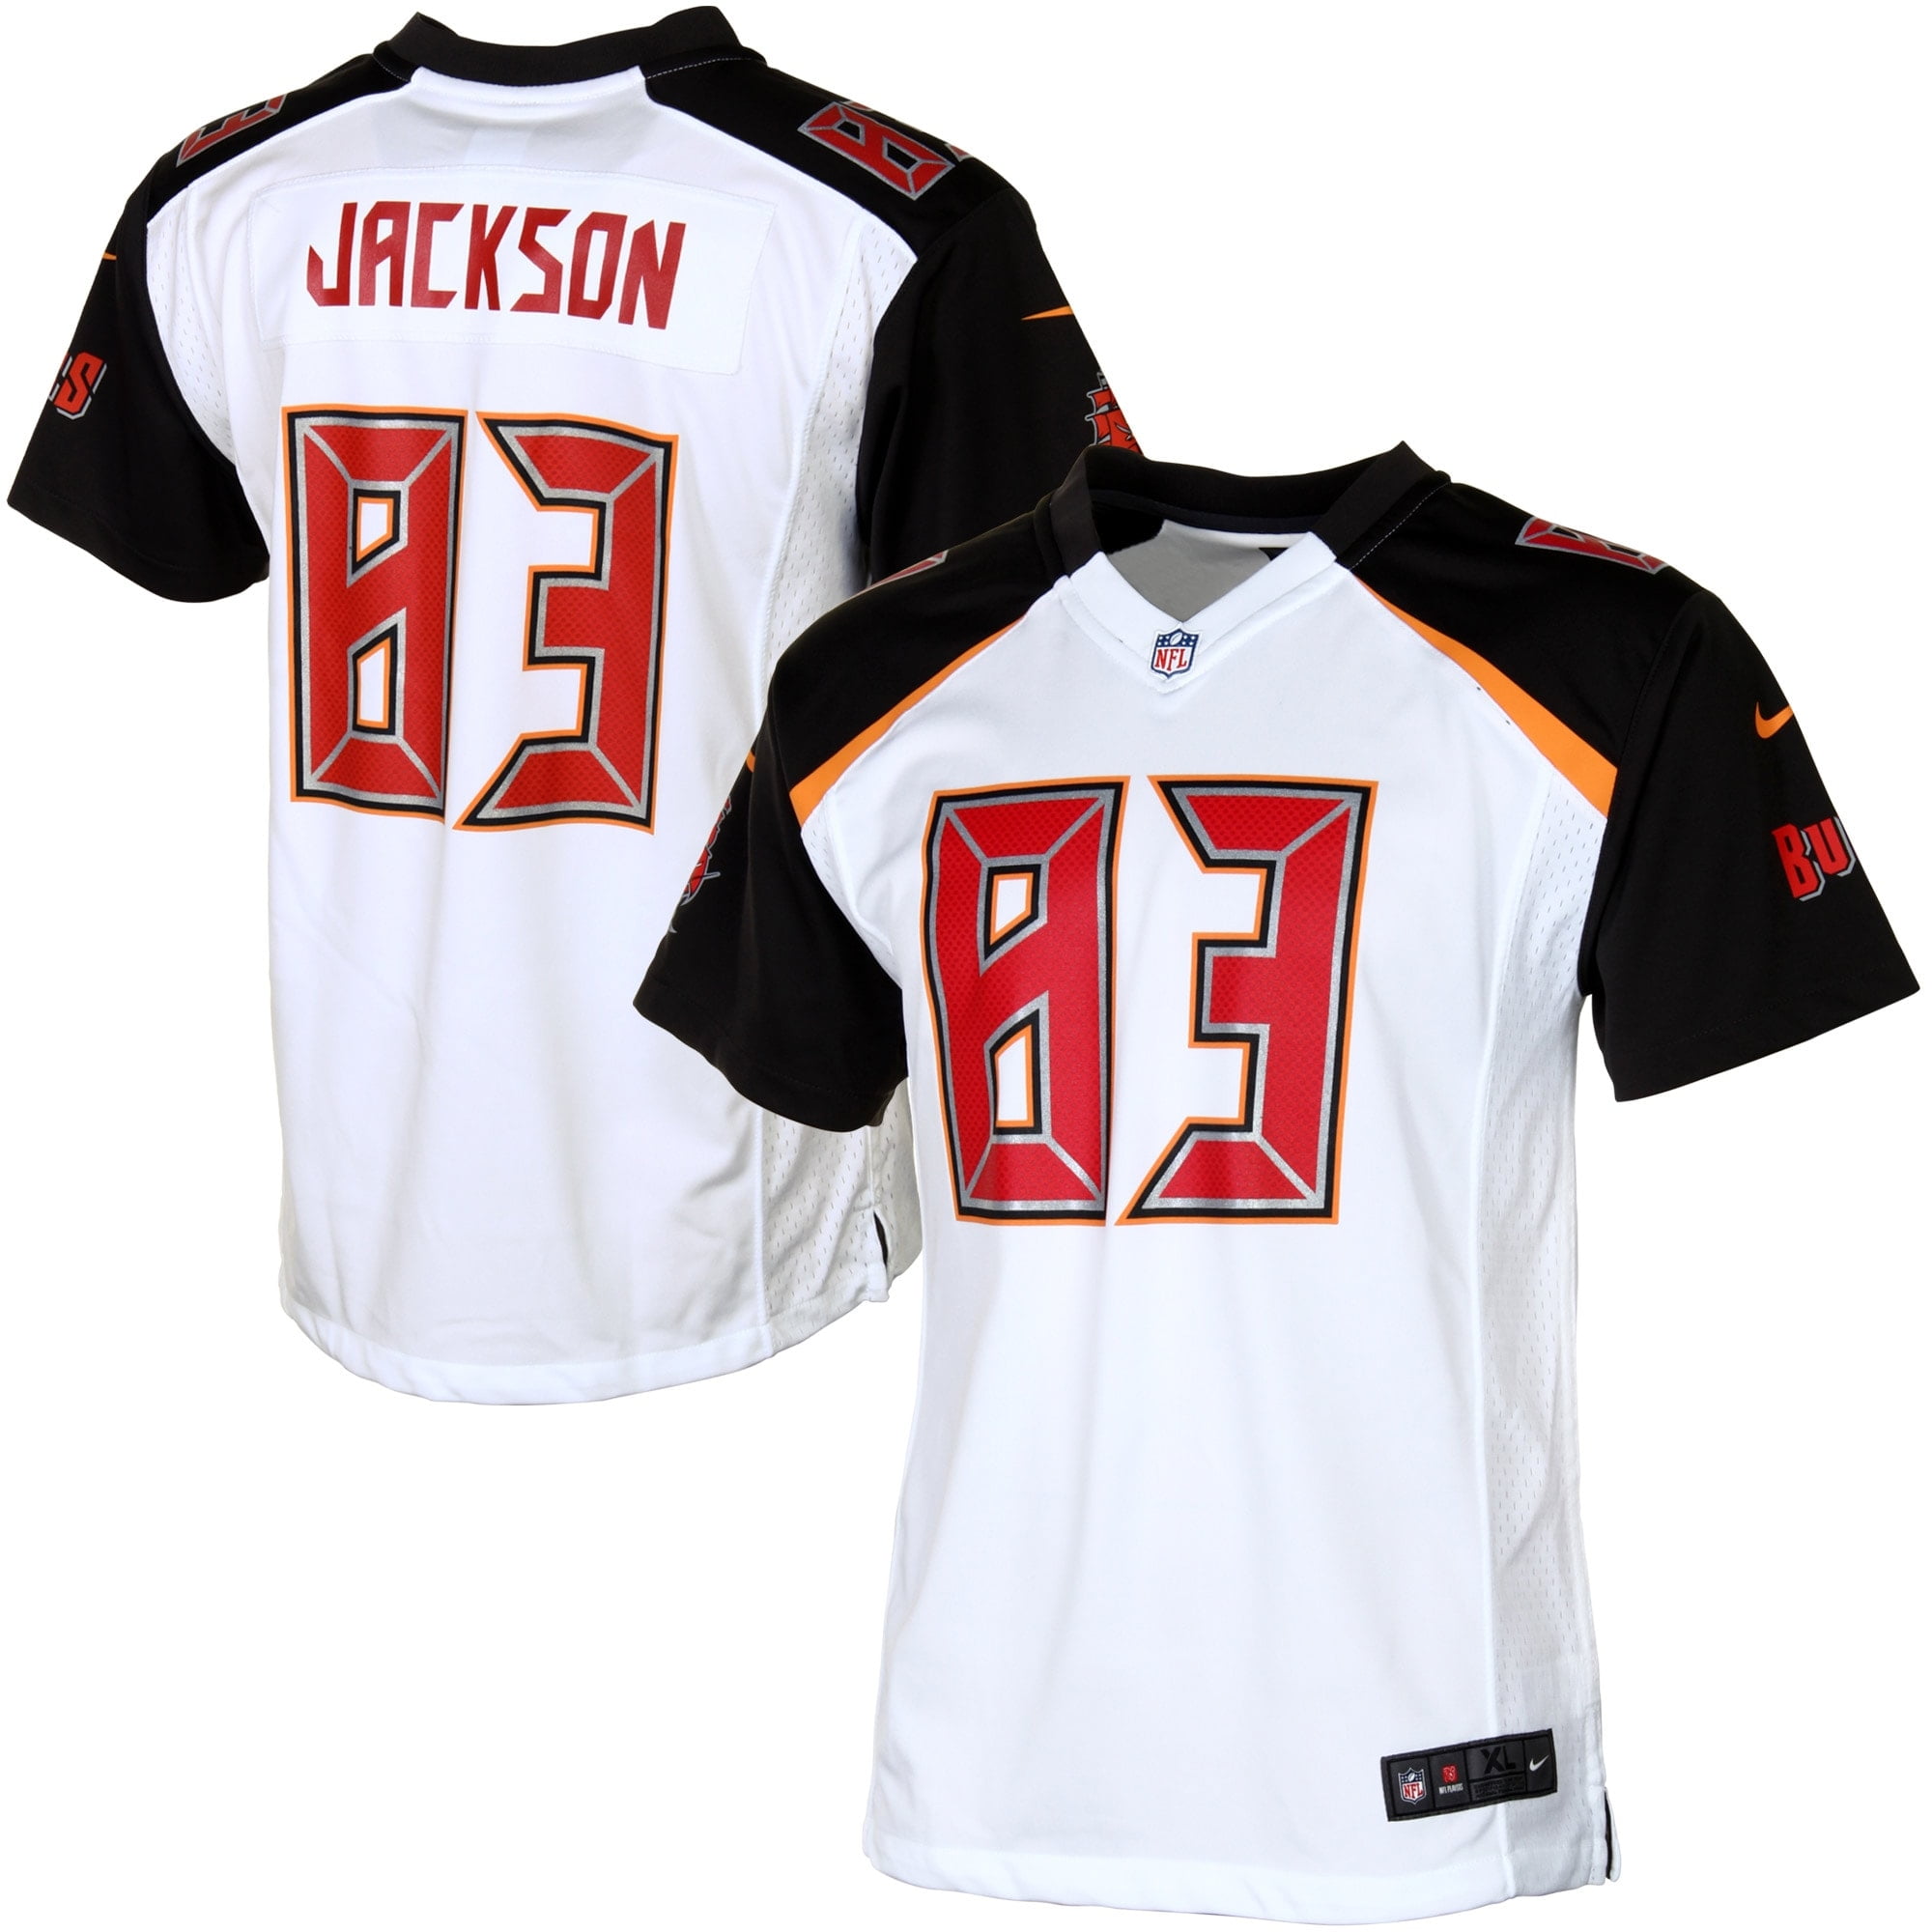 vincent jackson youth jersey